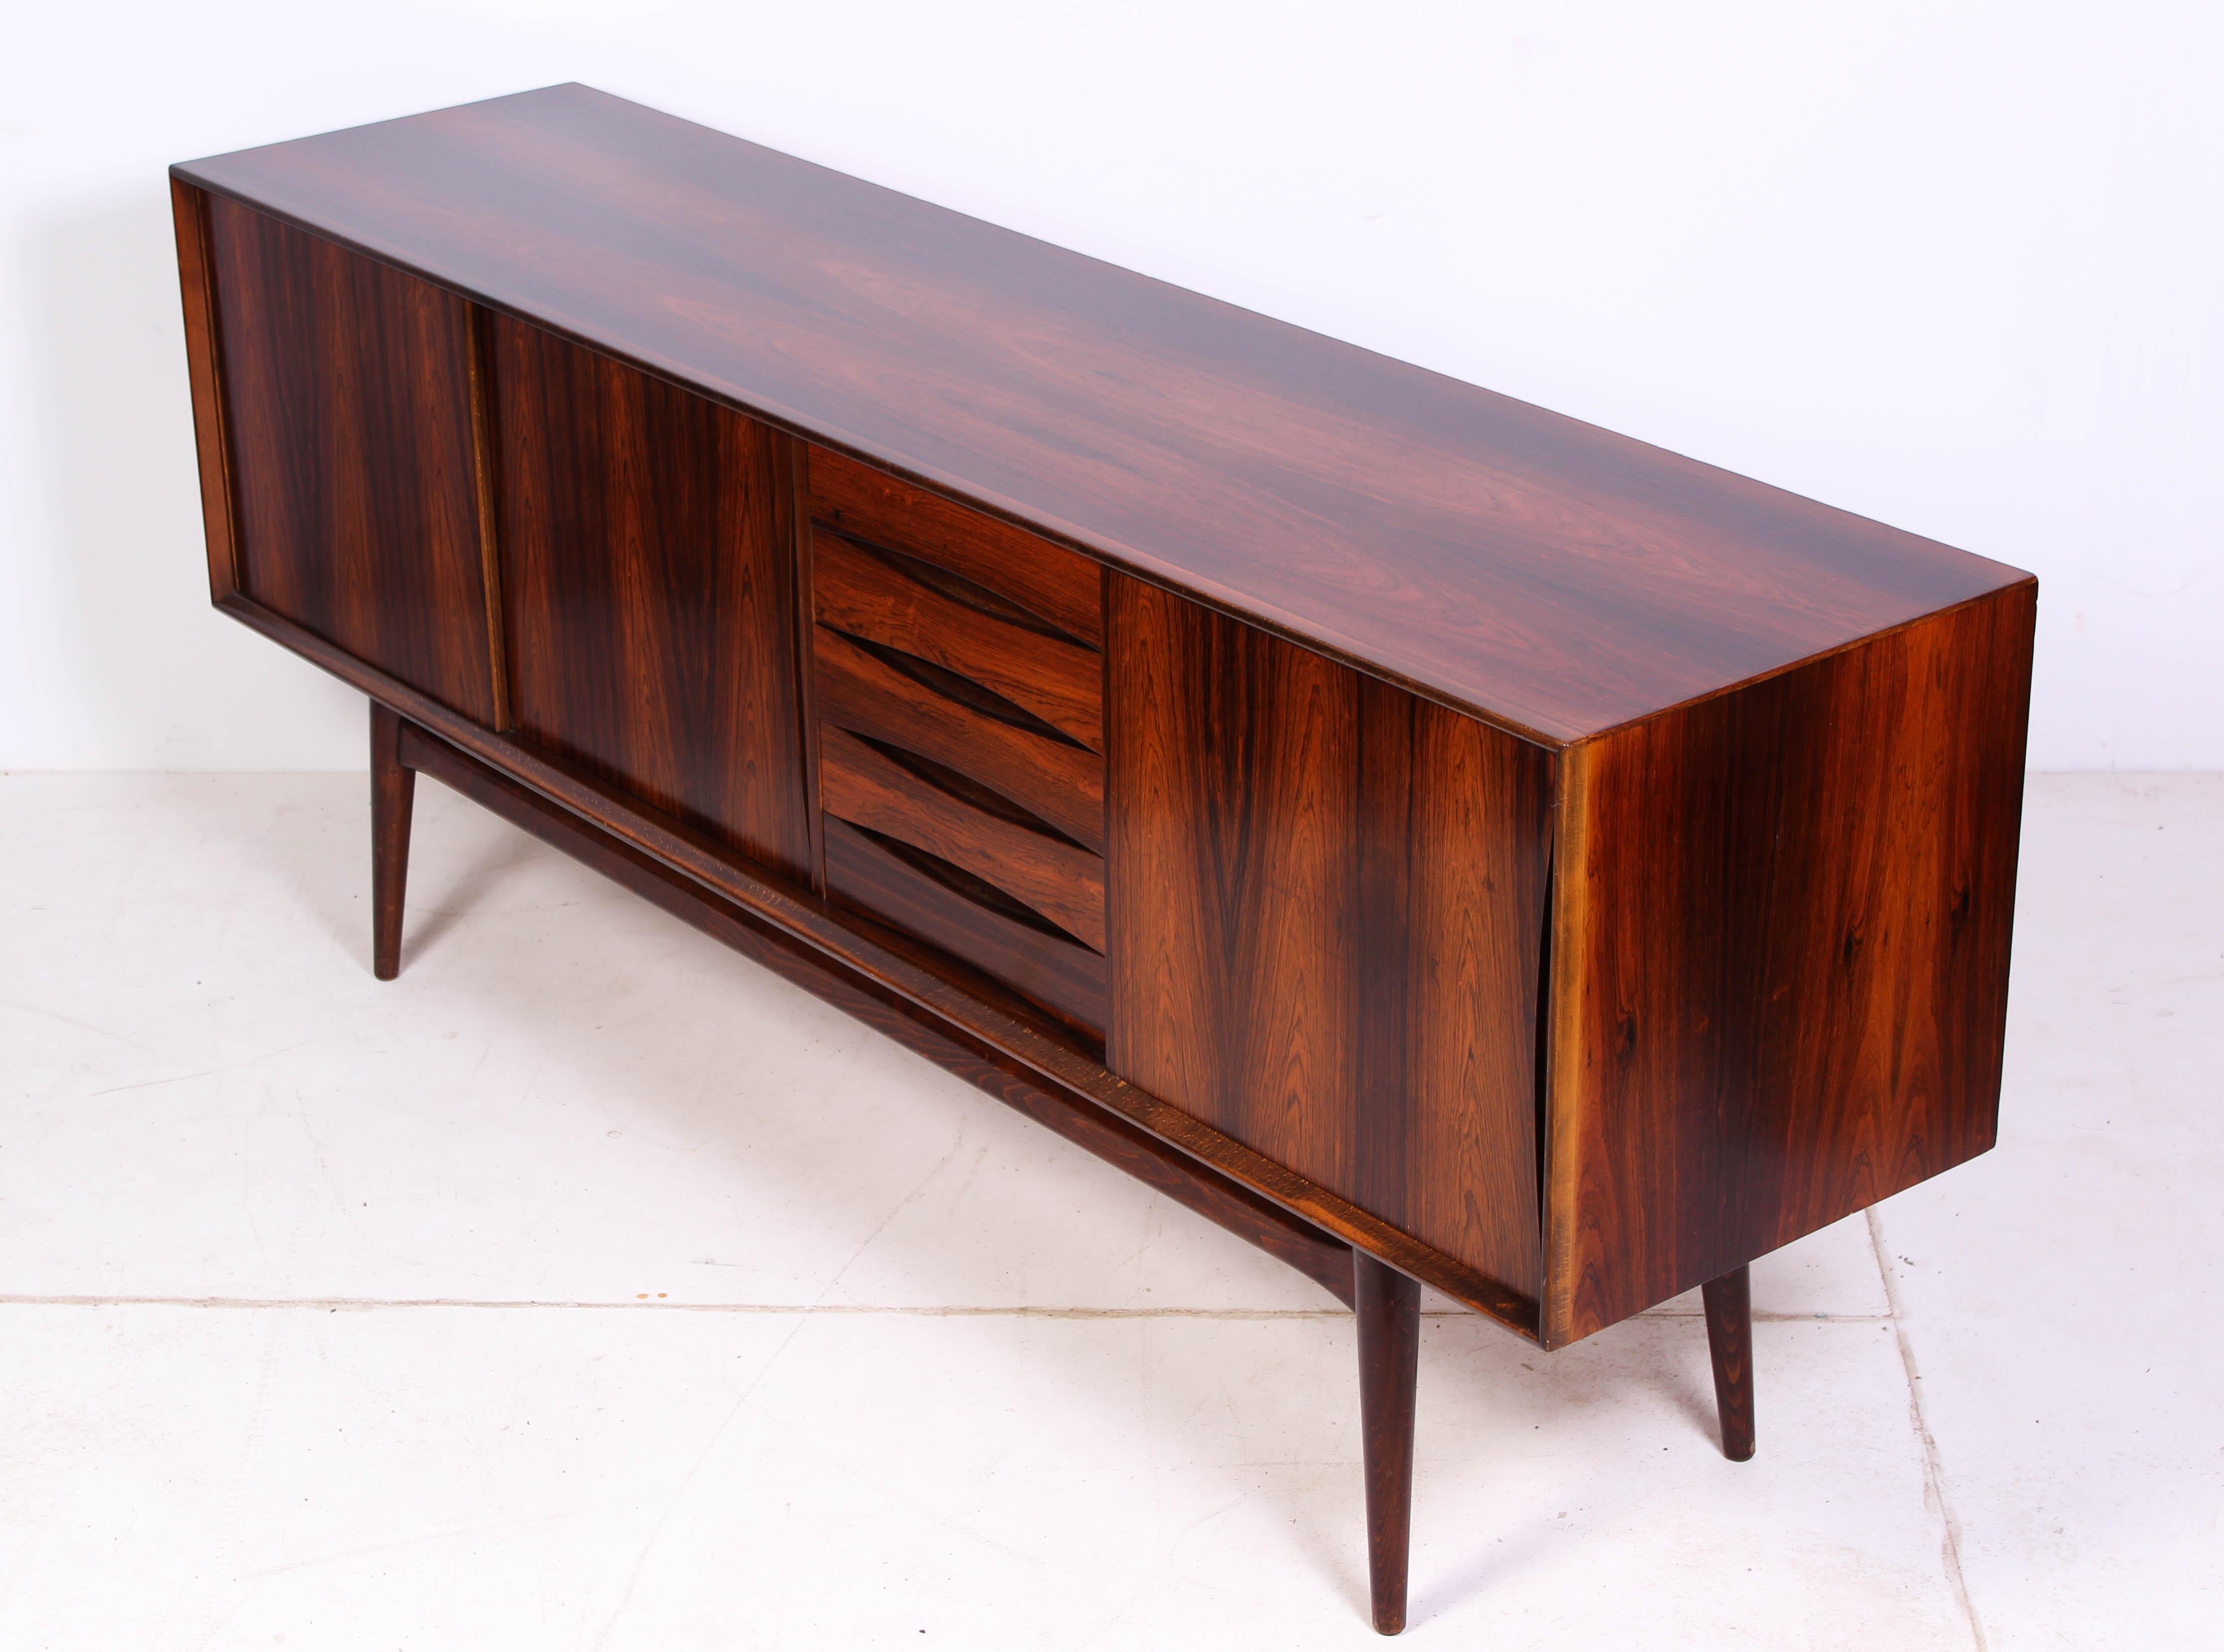 A midcentury rosewood sideboard from the 1950s. The sideboard is elegantly designed with high quality and has nice details such as carved handles in the sliding doors and the drawers. The whole upper part has been professionally refinished and is in